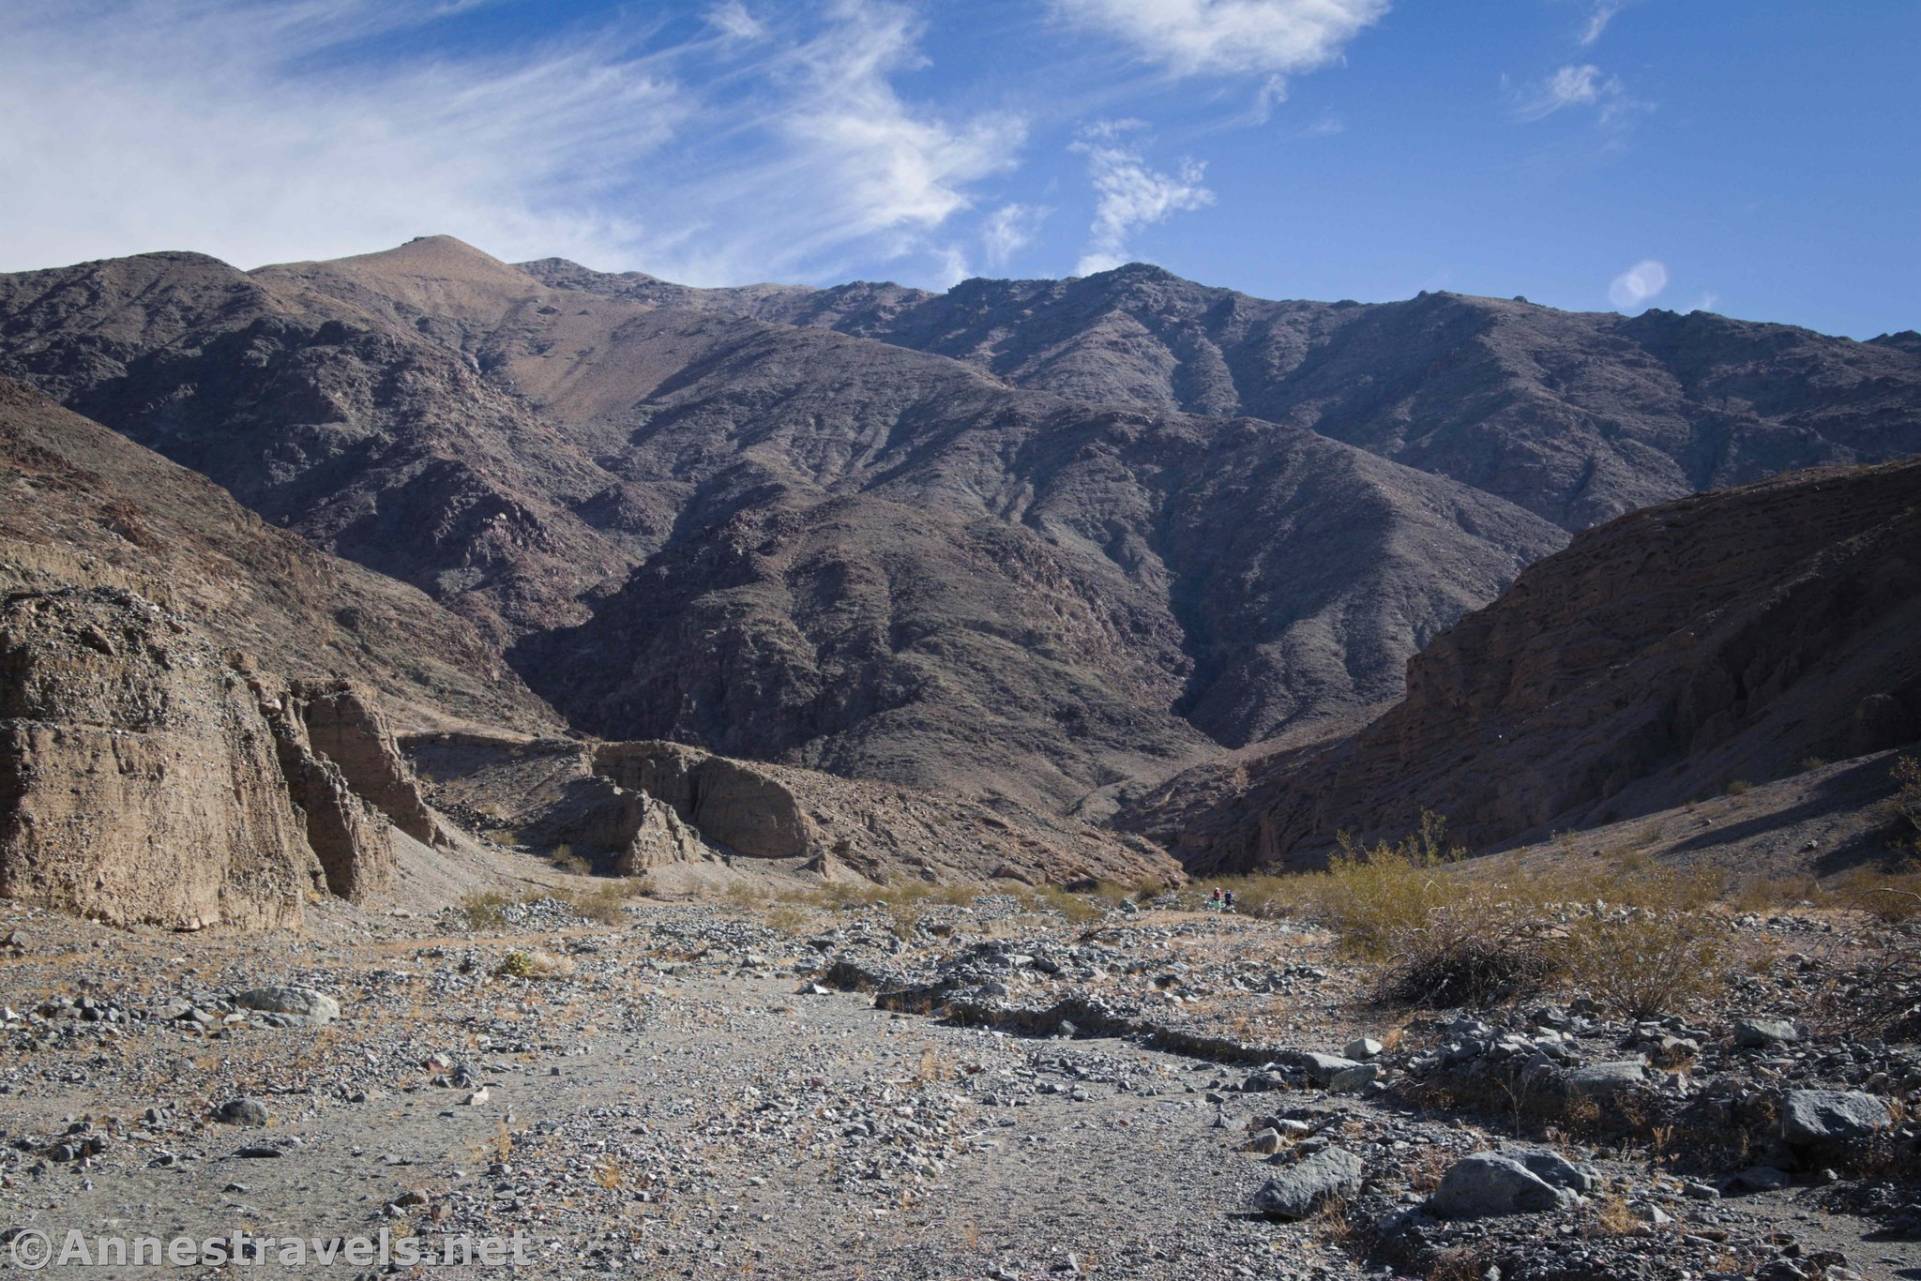 Willow Canyon in the Black Mountains, Death Valley National Park, California